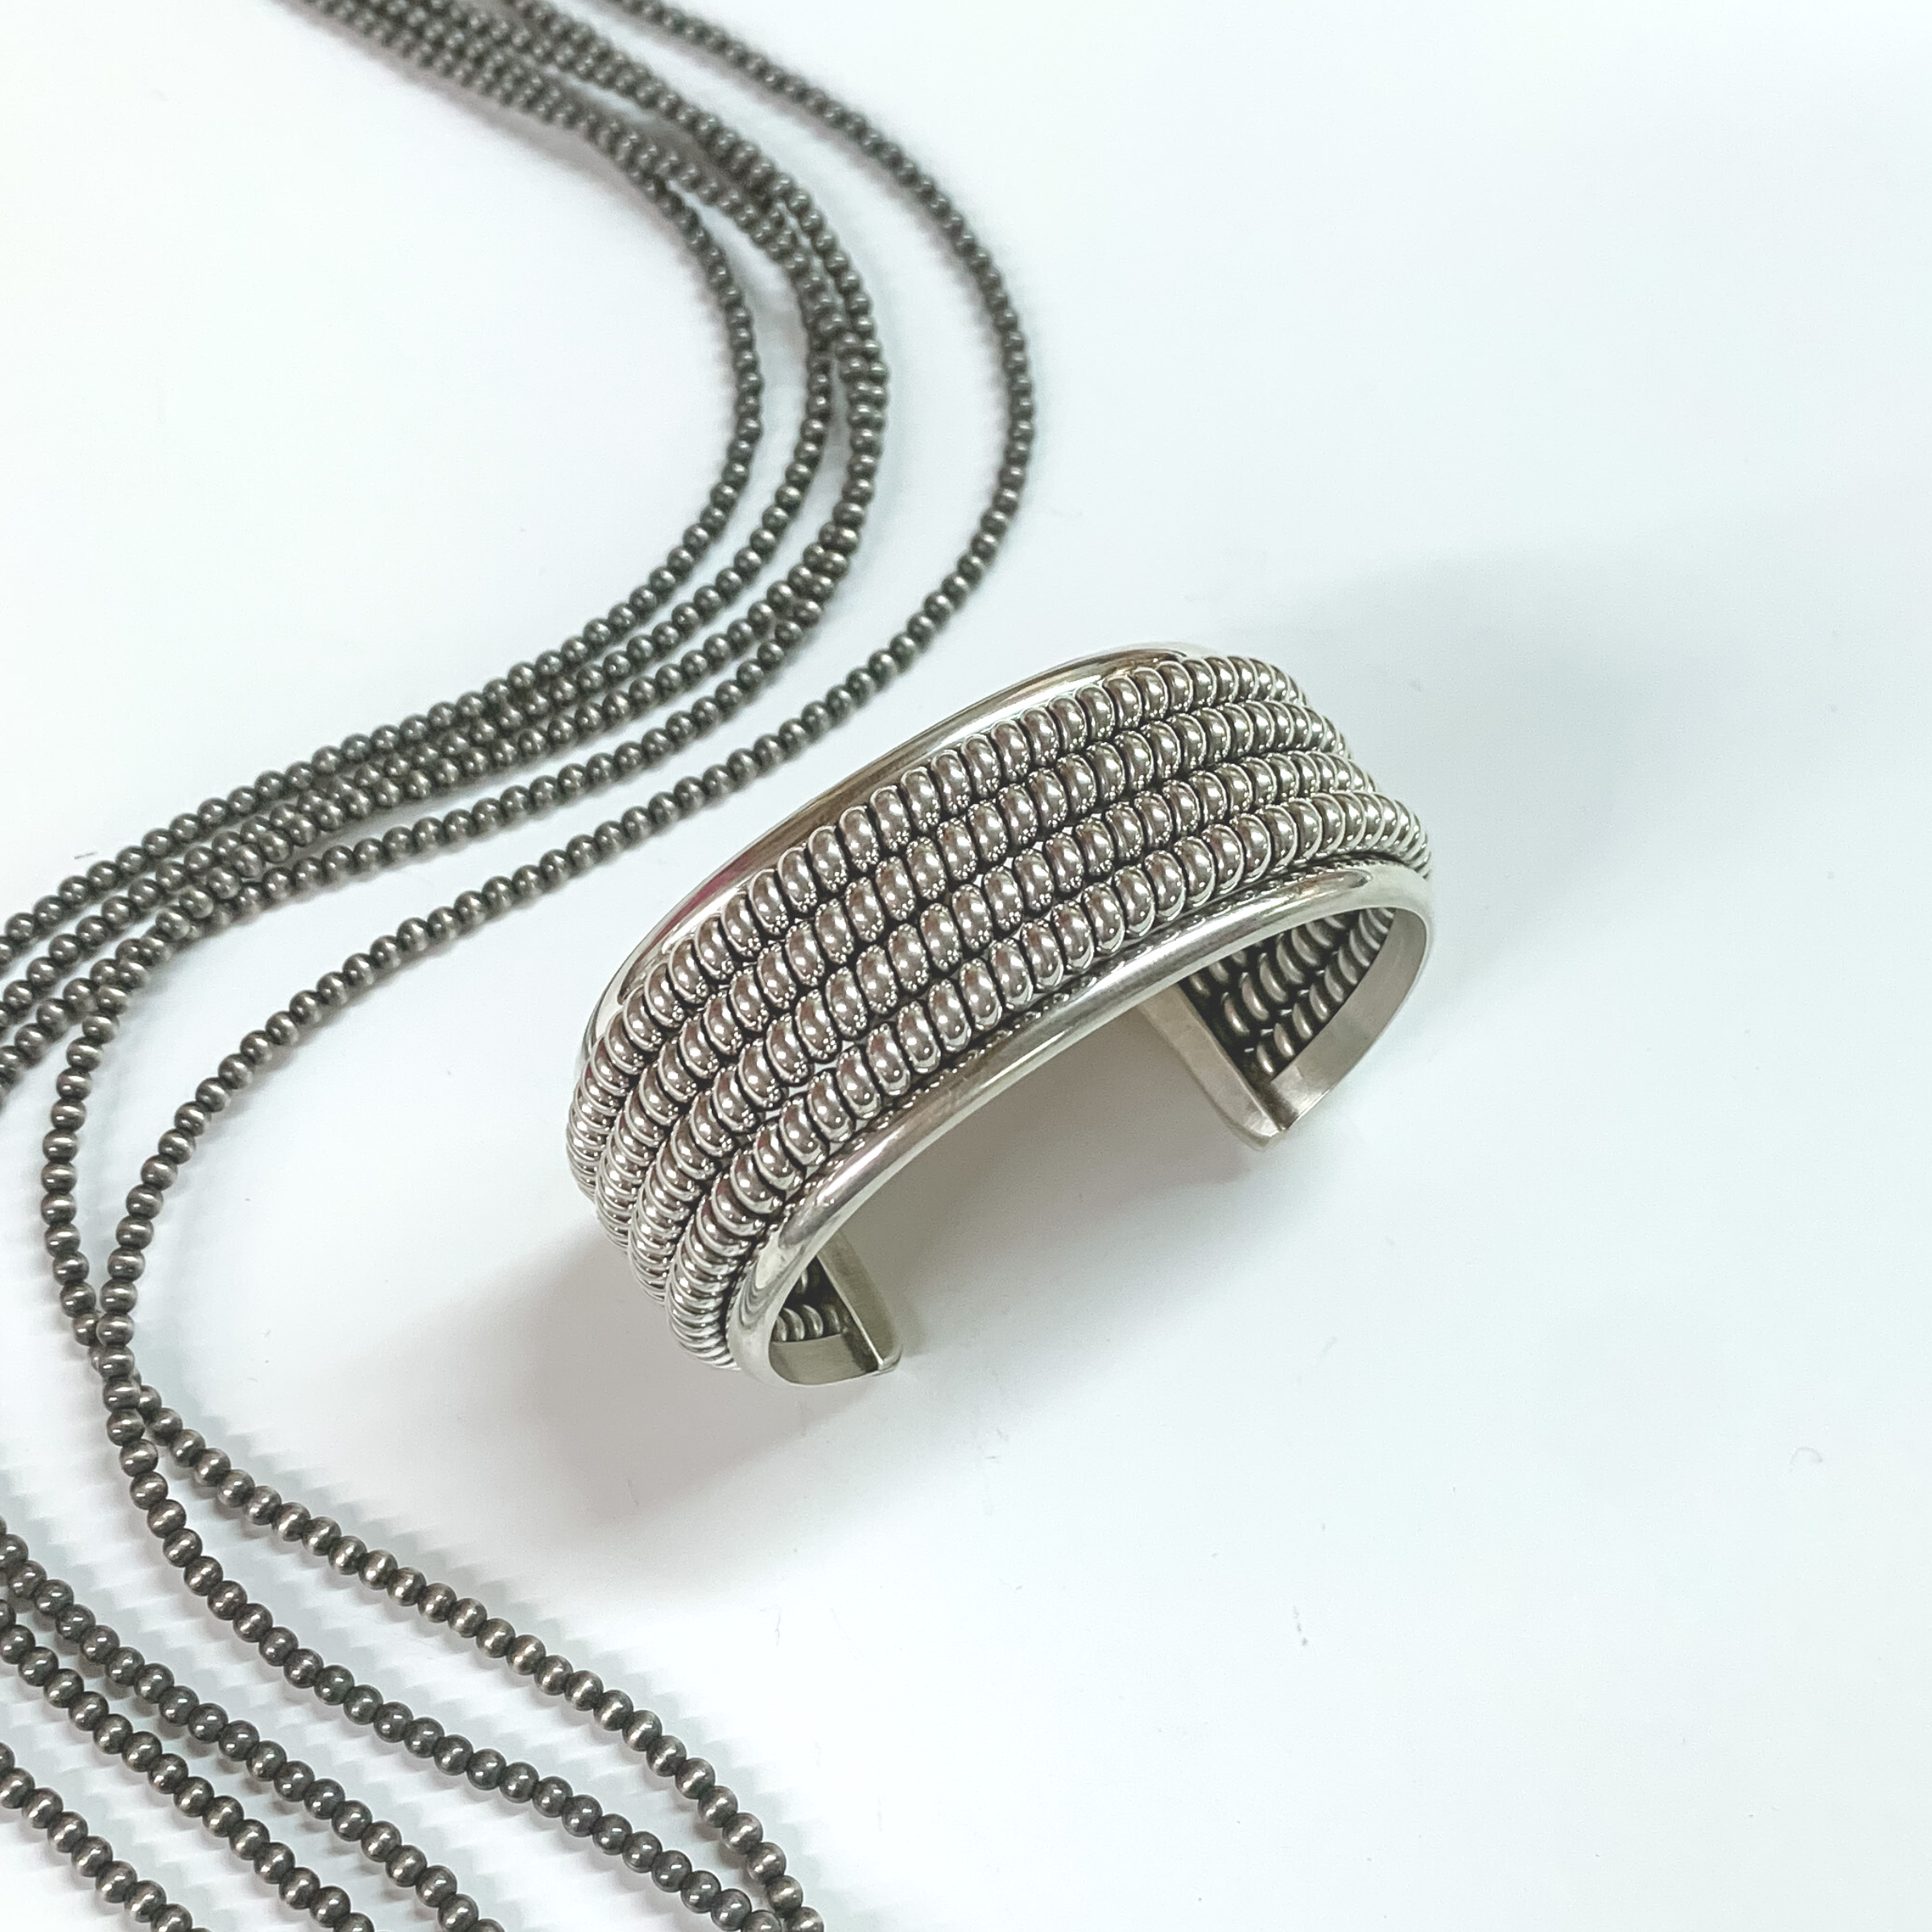 Caroline Tsosie | Navajo Handmade Sterling Silver Cuff Bracelet with Quadruple Rope Detailing Inlay - Giddy Up Glamour Boutique